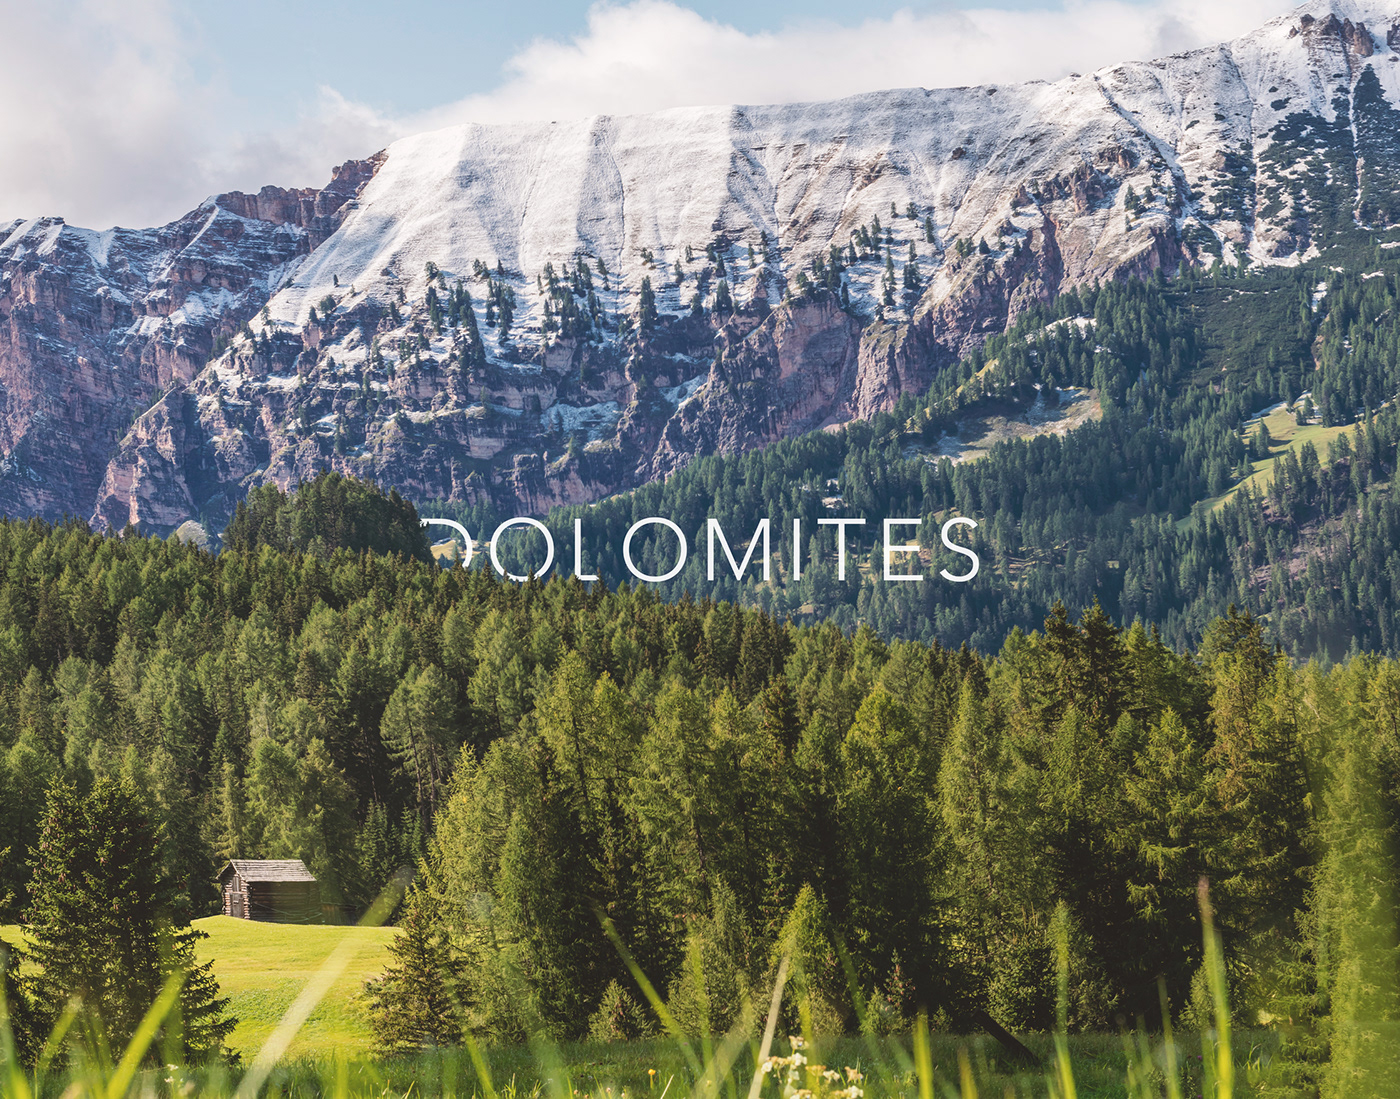 Journey through the Alta Badia valley, a beautiful part of the Dolomites UNESCO World Heritage Site.